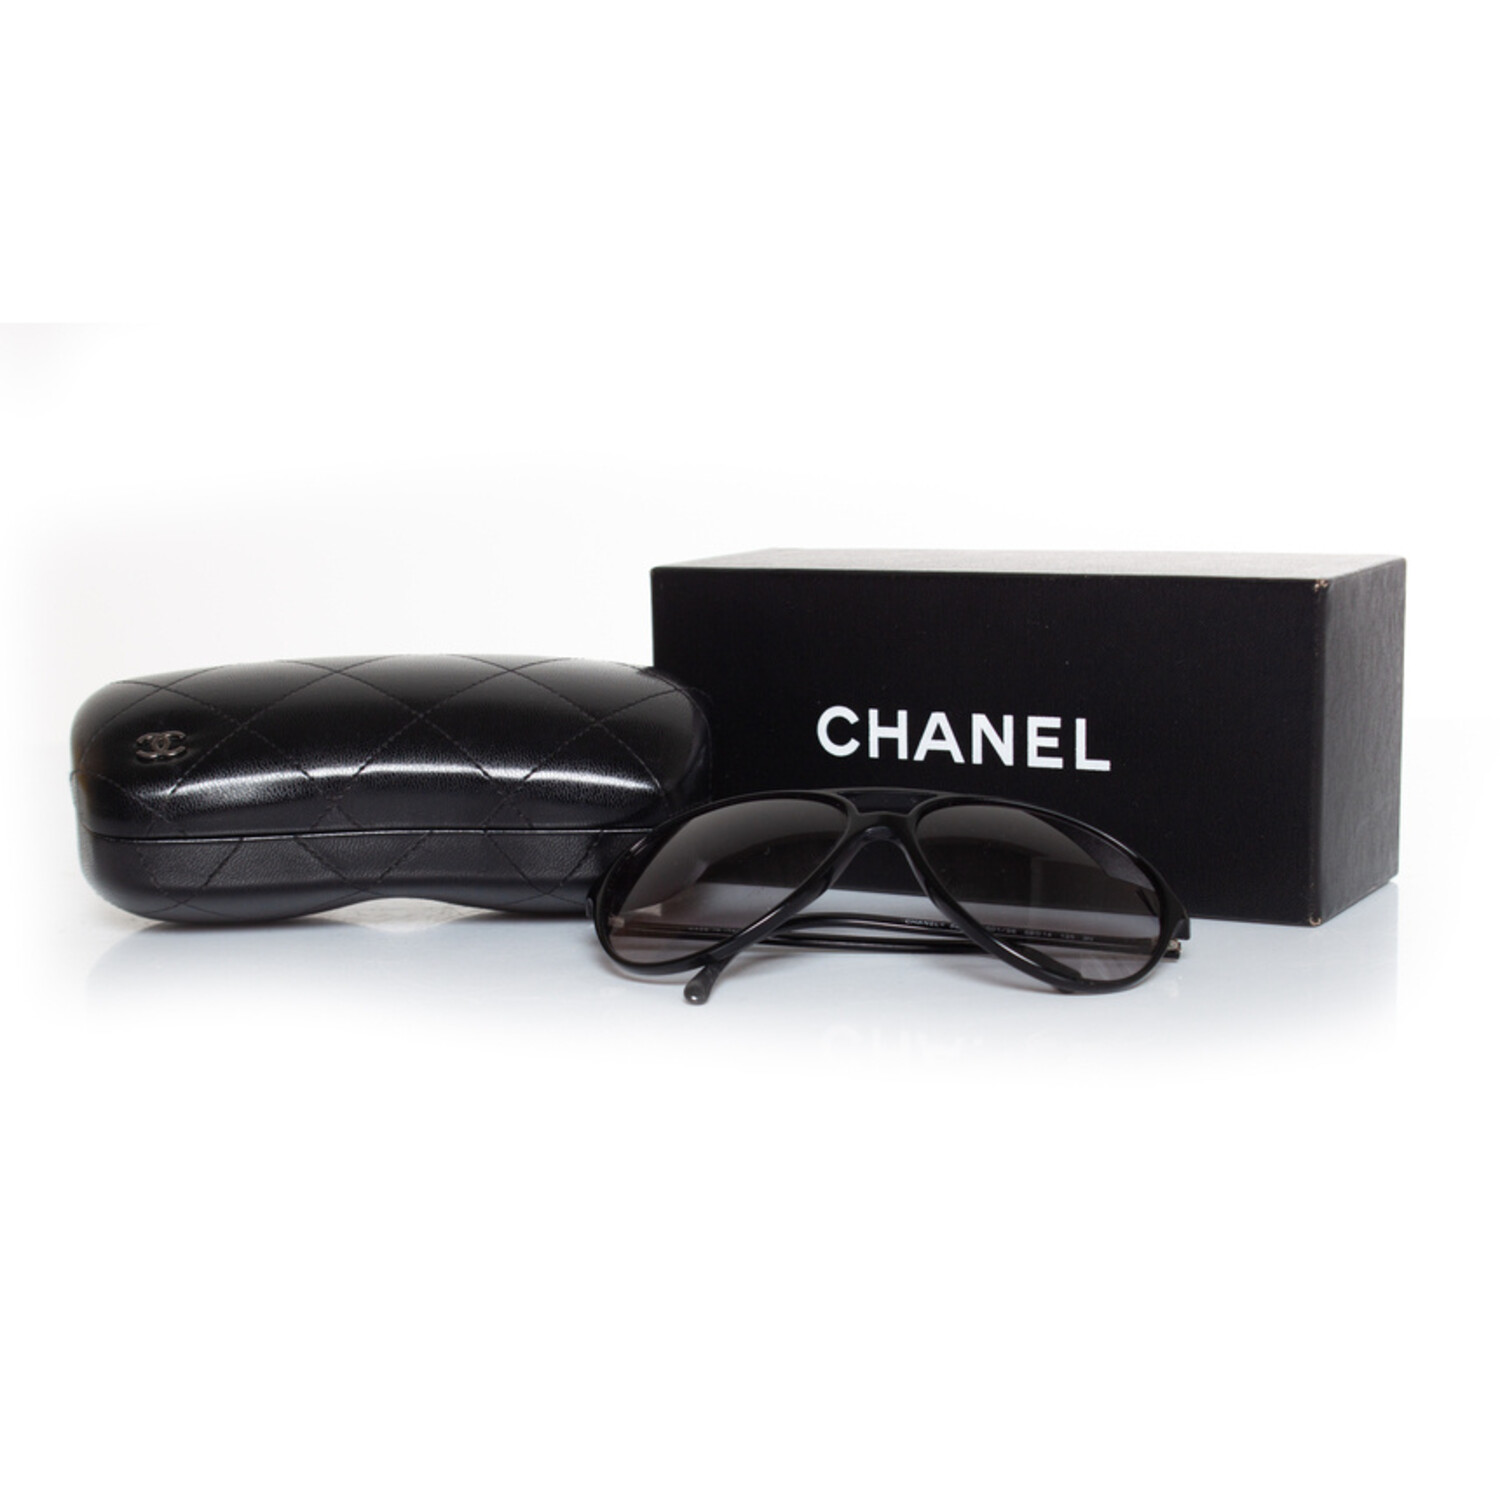 PRE OWNED AUTHENTIC AVIATOR CHANEL SUNGLASSES